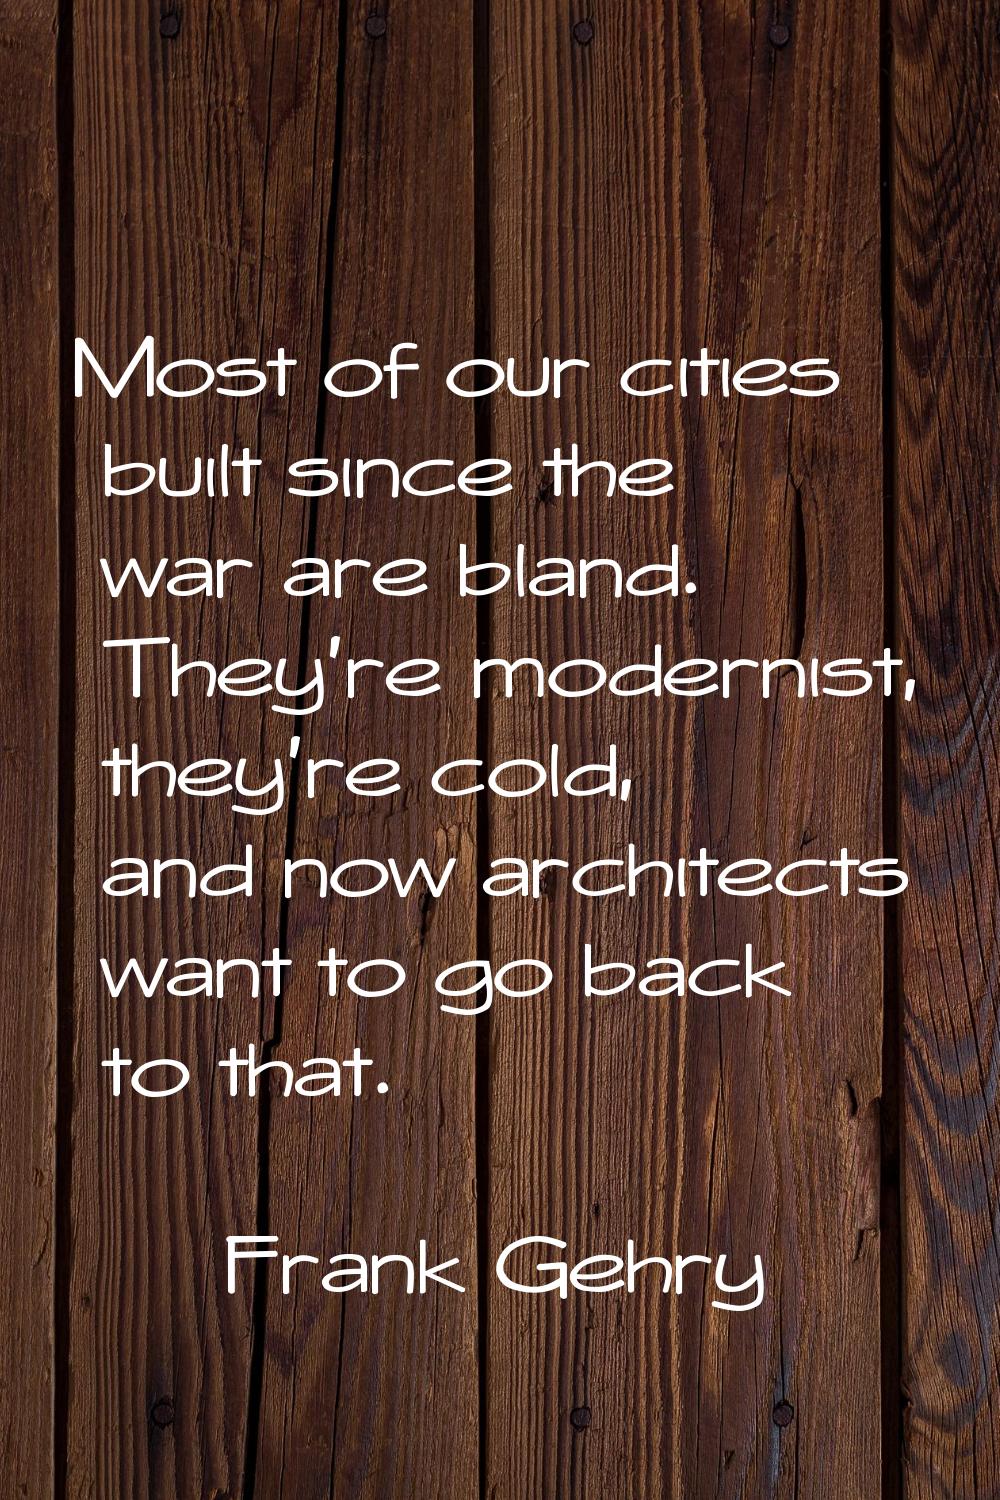 Most of our cities built since the war are bland. They're modernist, they're cold, and now architec